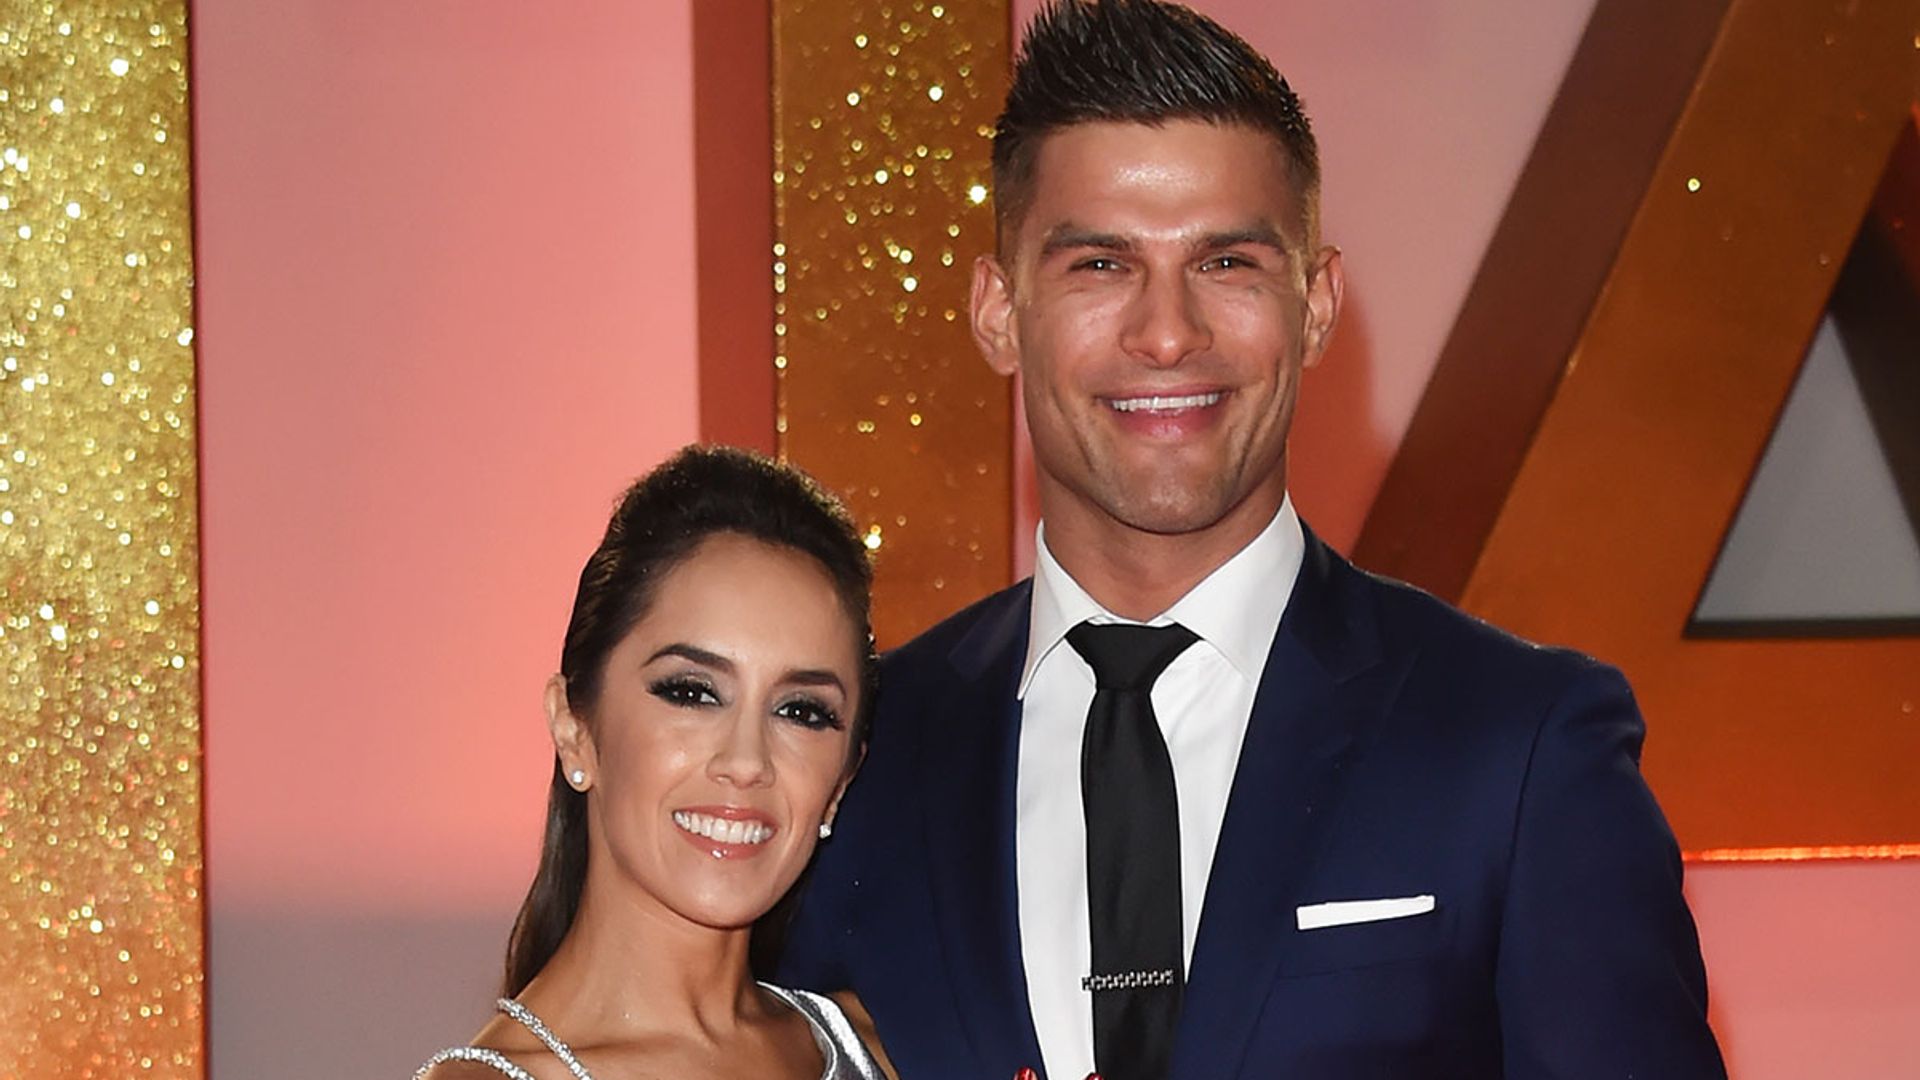 Strictly's Janette Manrara and Aljaz Skorjanec invited to Buckingham Palace - find out why